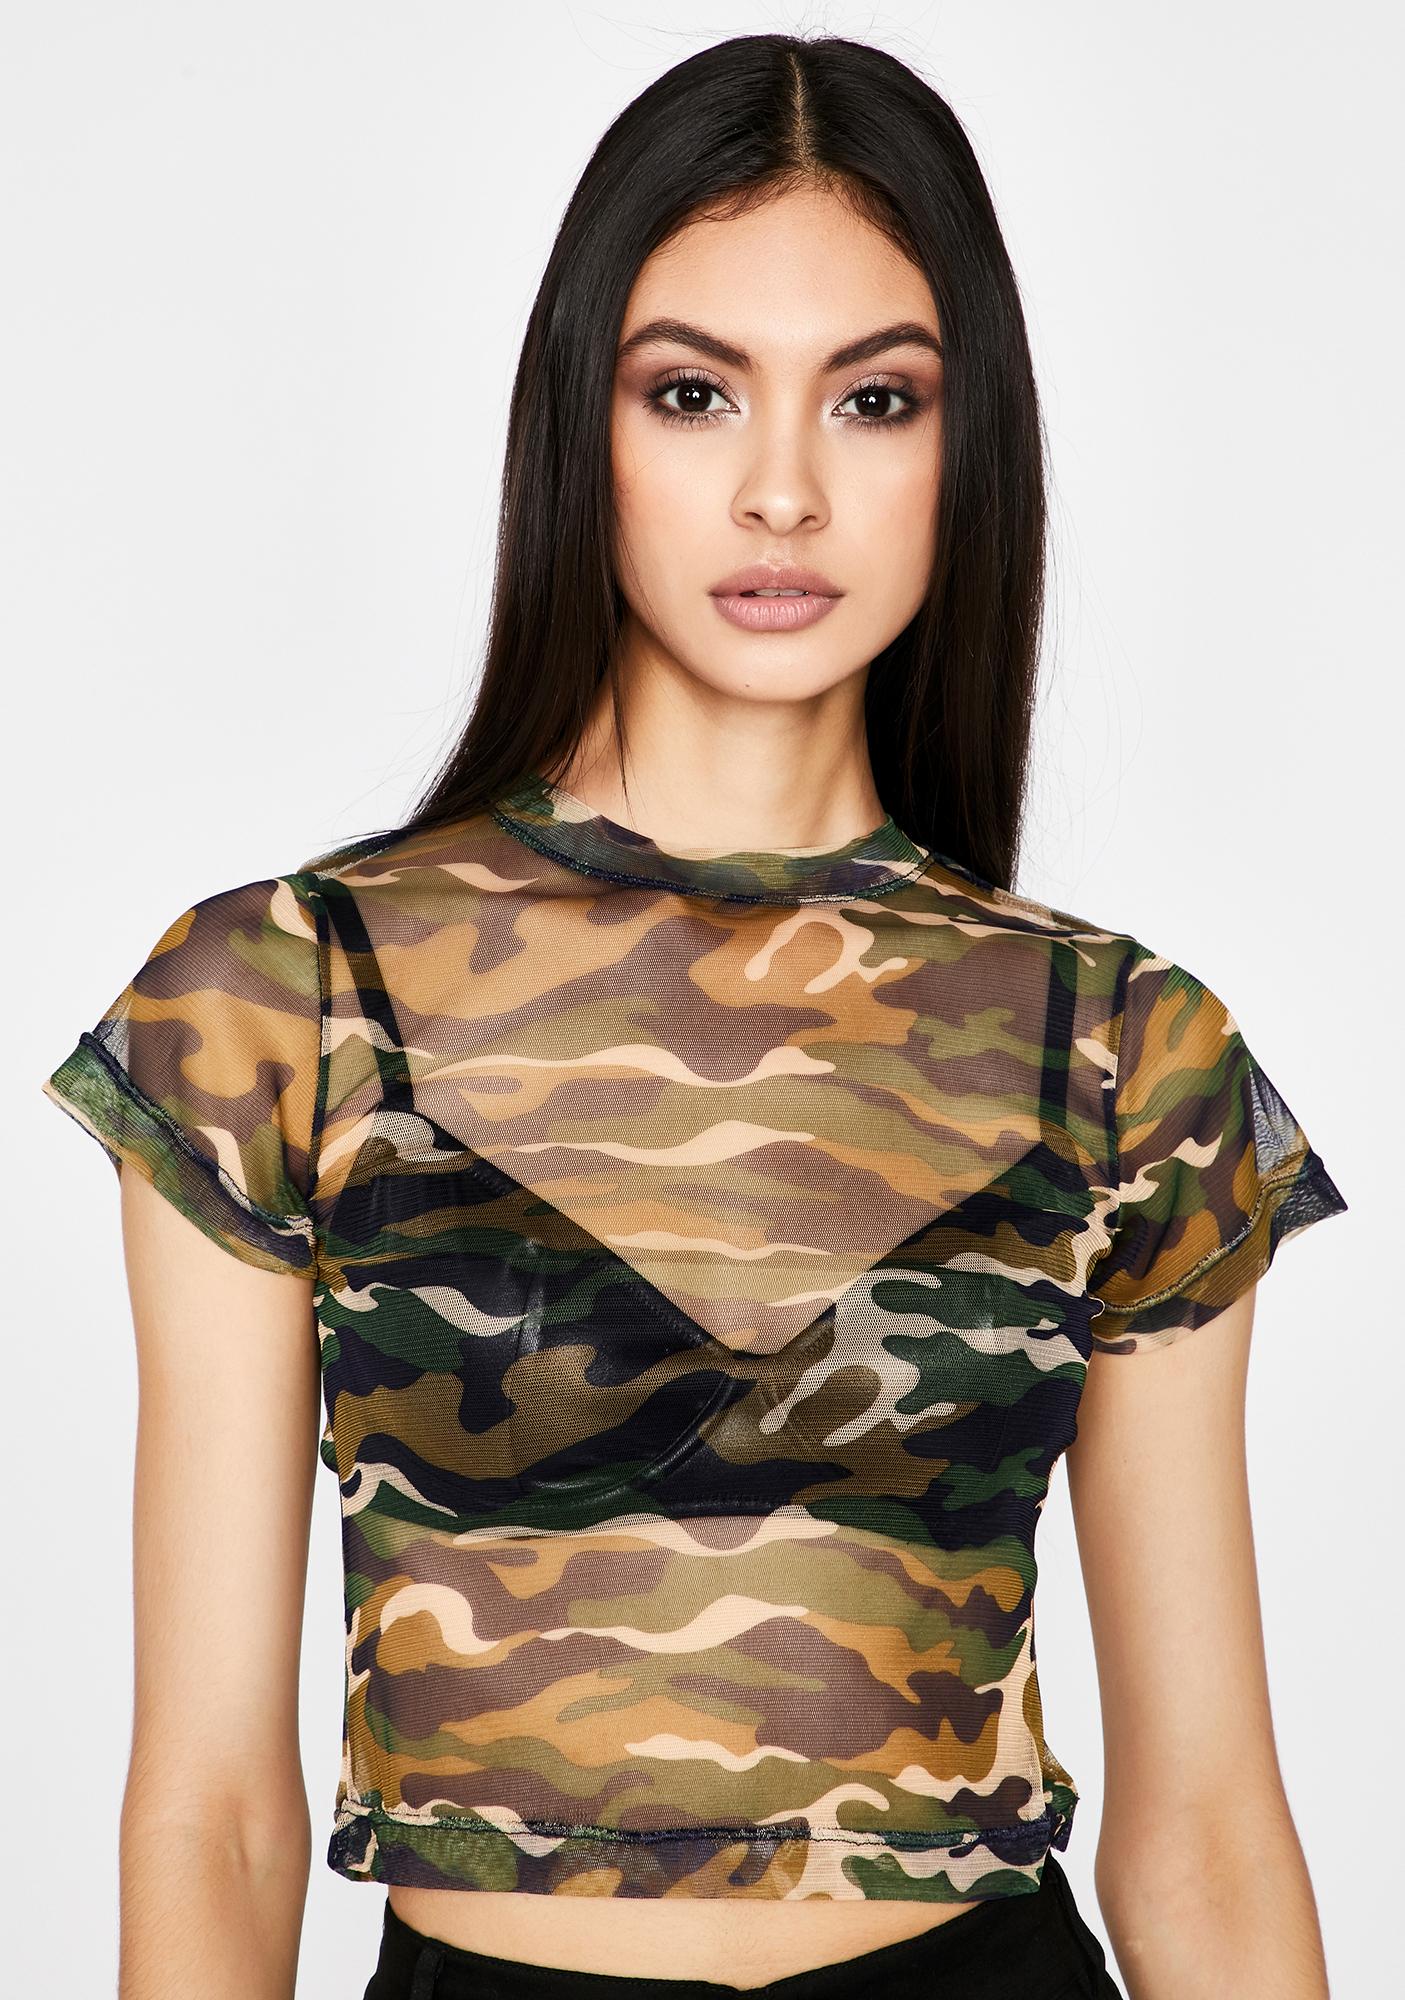 sheer camouflage top